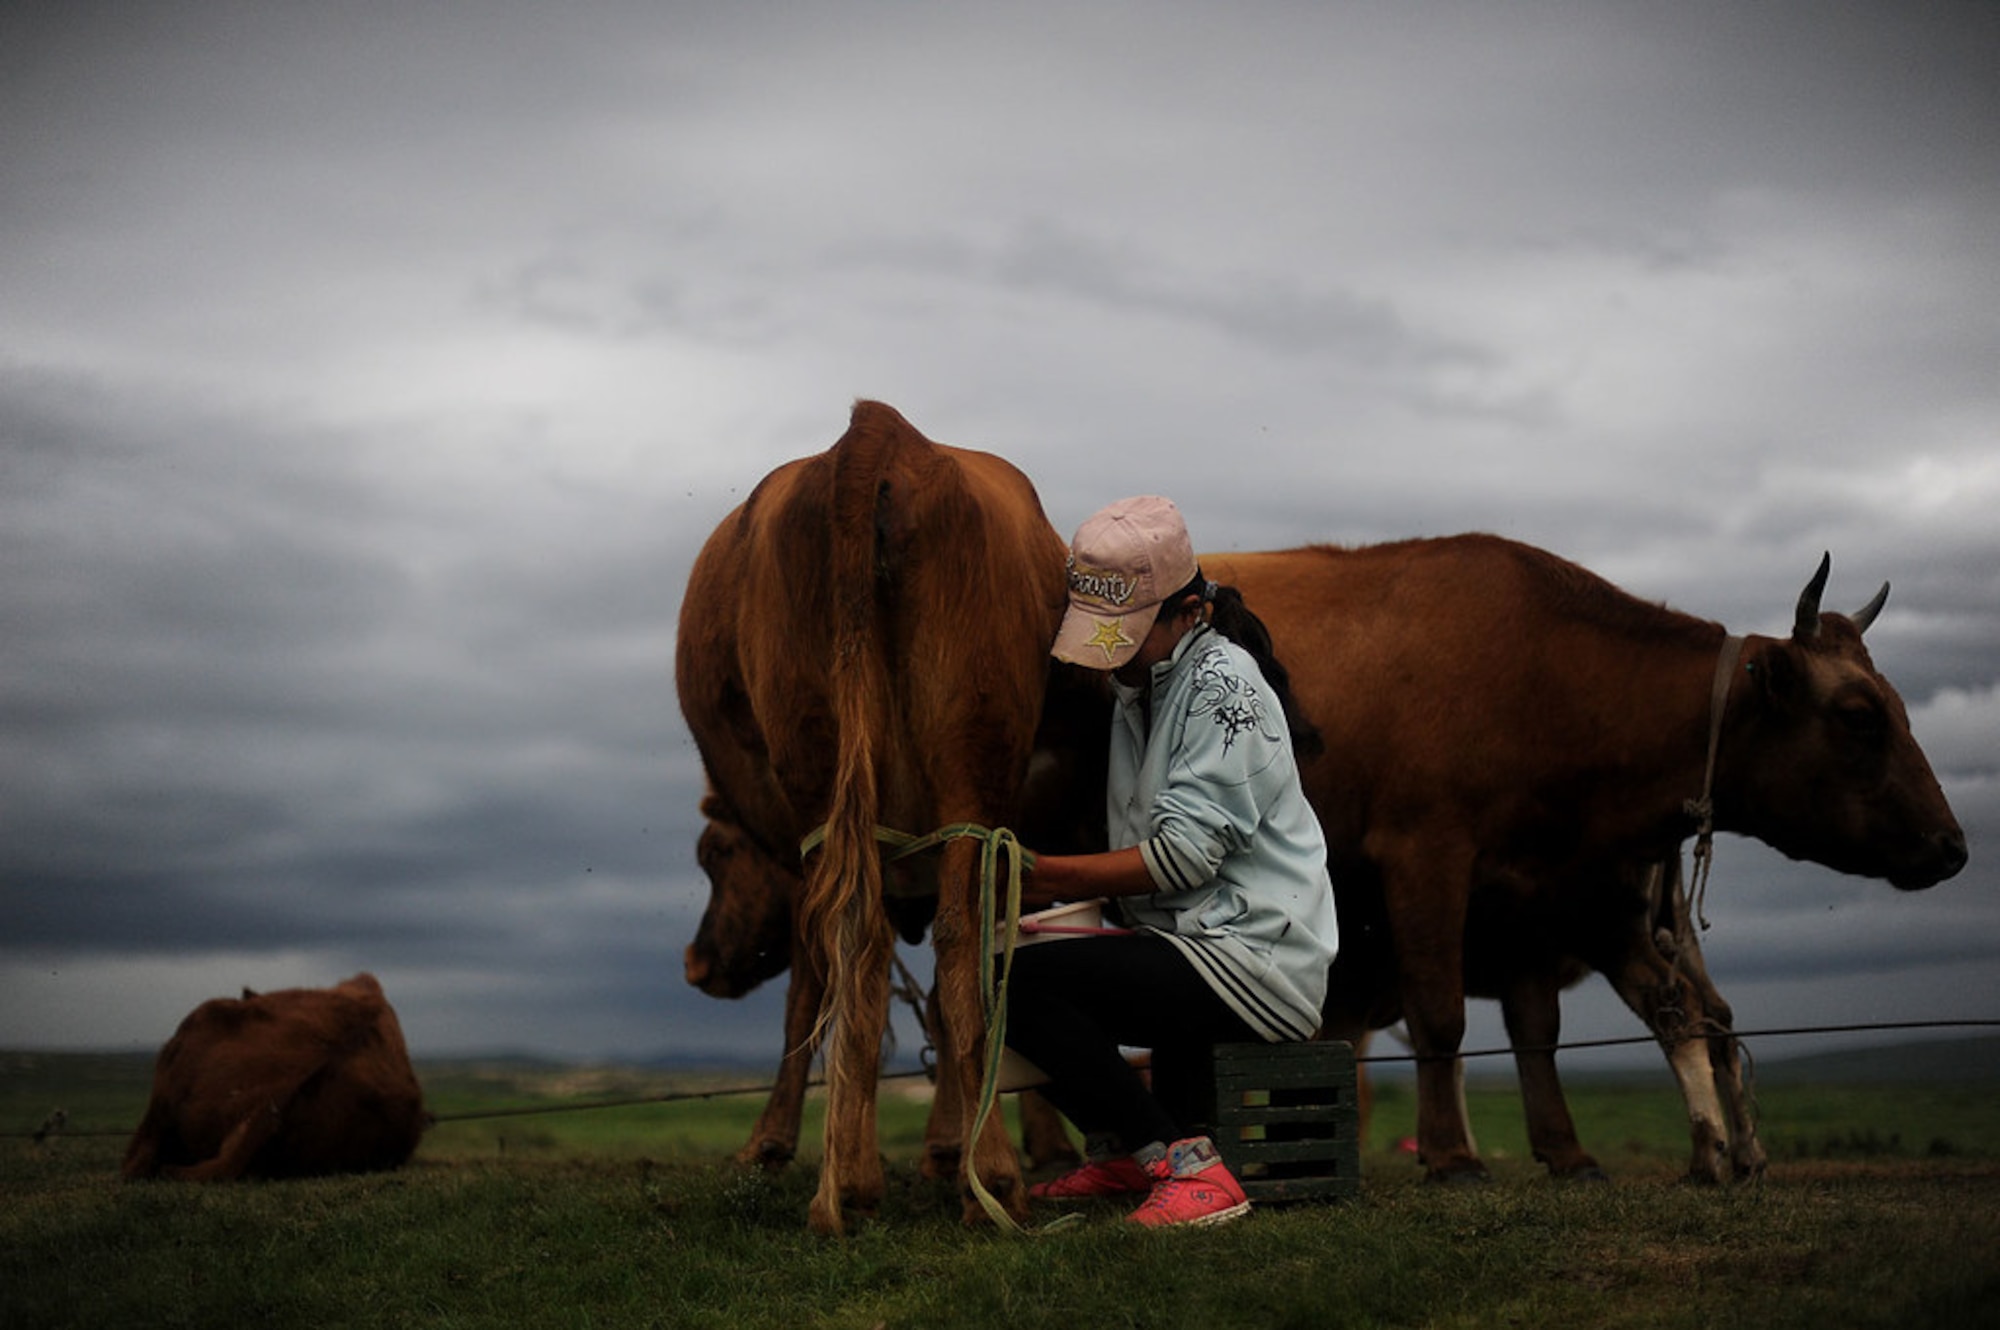 A Mongolian herder milks her cows in the late afternoon. The size of the livestock holdings of most families, particularly newcomers who have migrated from urban centers, is well below the subsistence level. For a sustainable livelihood over the long term, a family of herders needs at least 10 heads of cattle or yak or 70 sheep. Yet when livestock collectives were disbanded in the early 1990s, about 20 percent of families, many of them headed by women, received fewer than 10 animals. (U.S. Air Force photo/Master Sgt. Jeremy Lock)